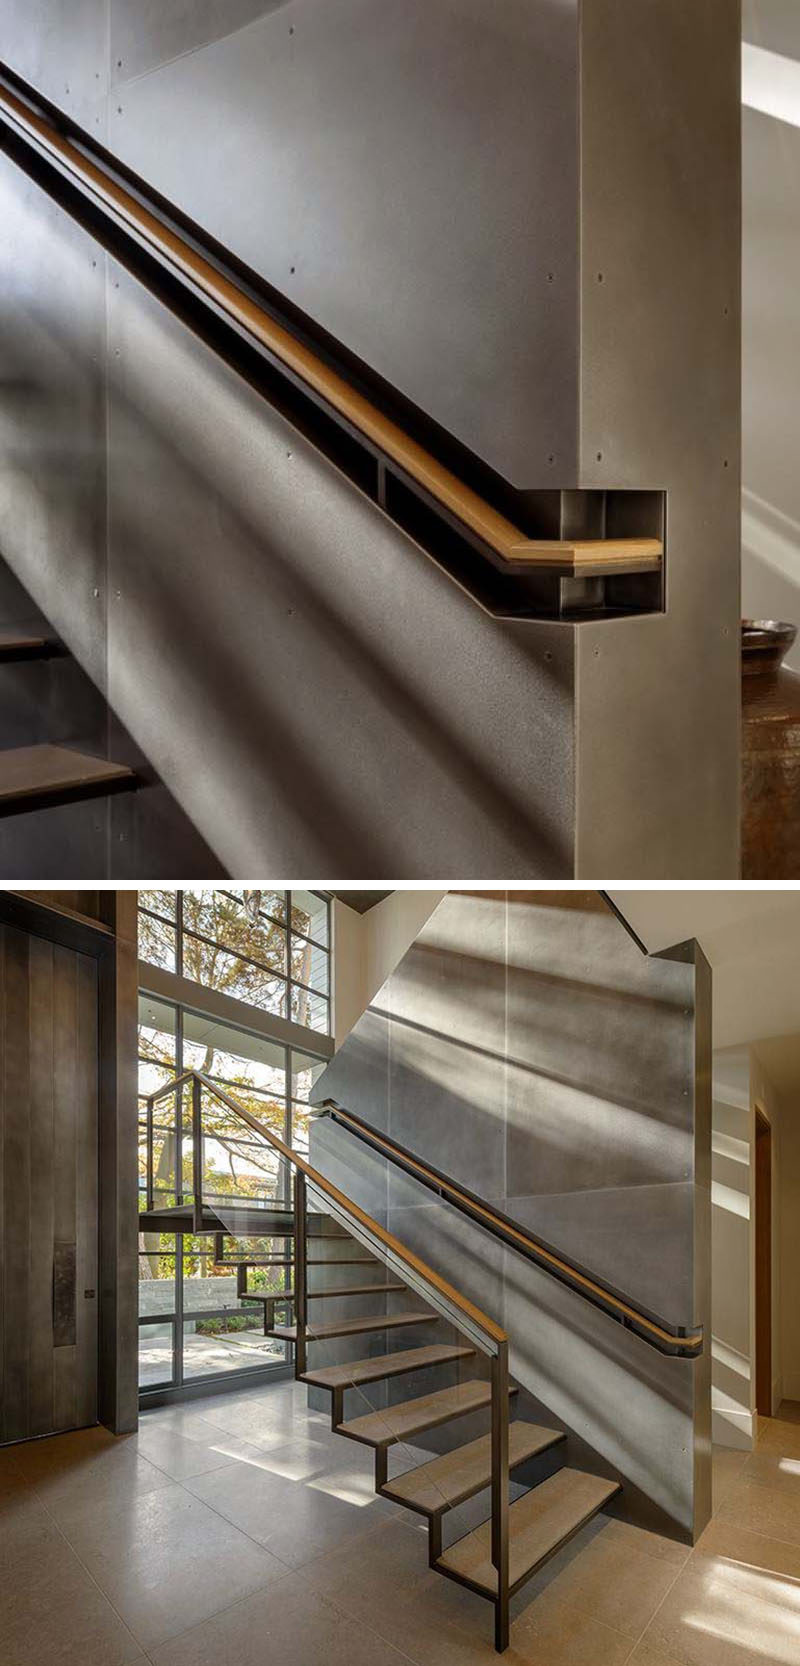 This wood and steel built-in handrail has been included in a section of the wall for a more industrial look.